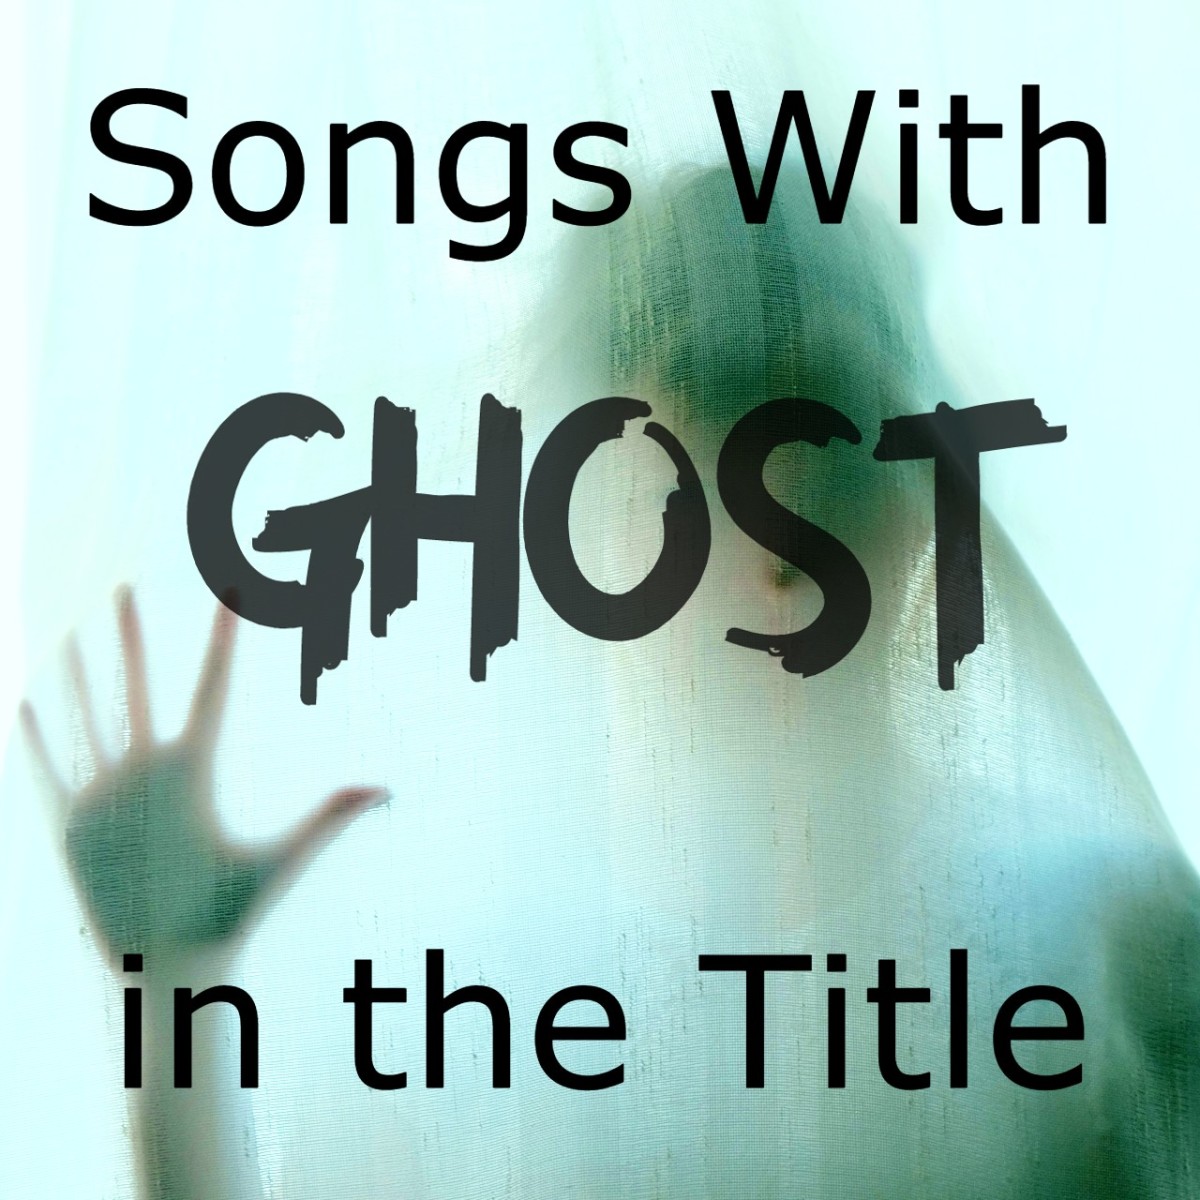 48 Songs With Ghost in the Title